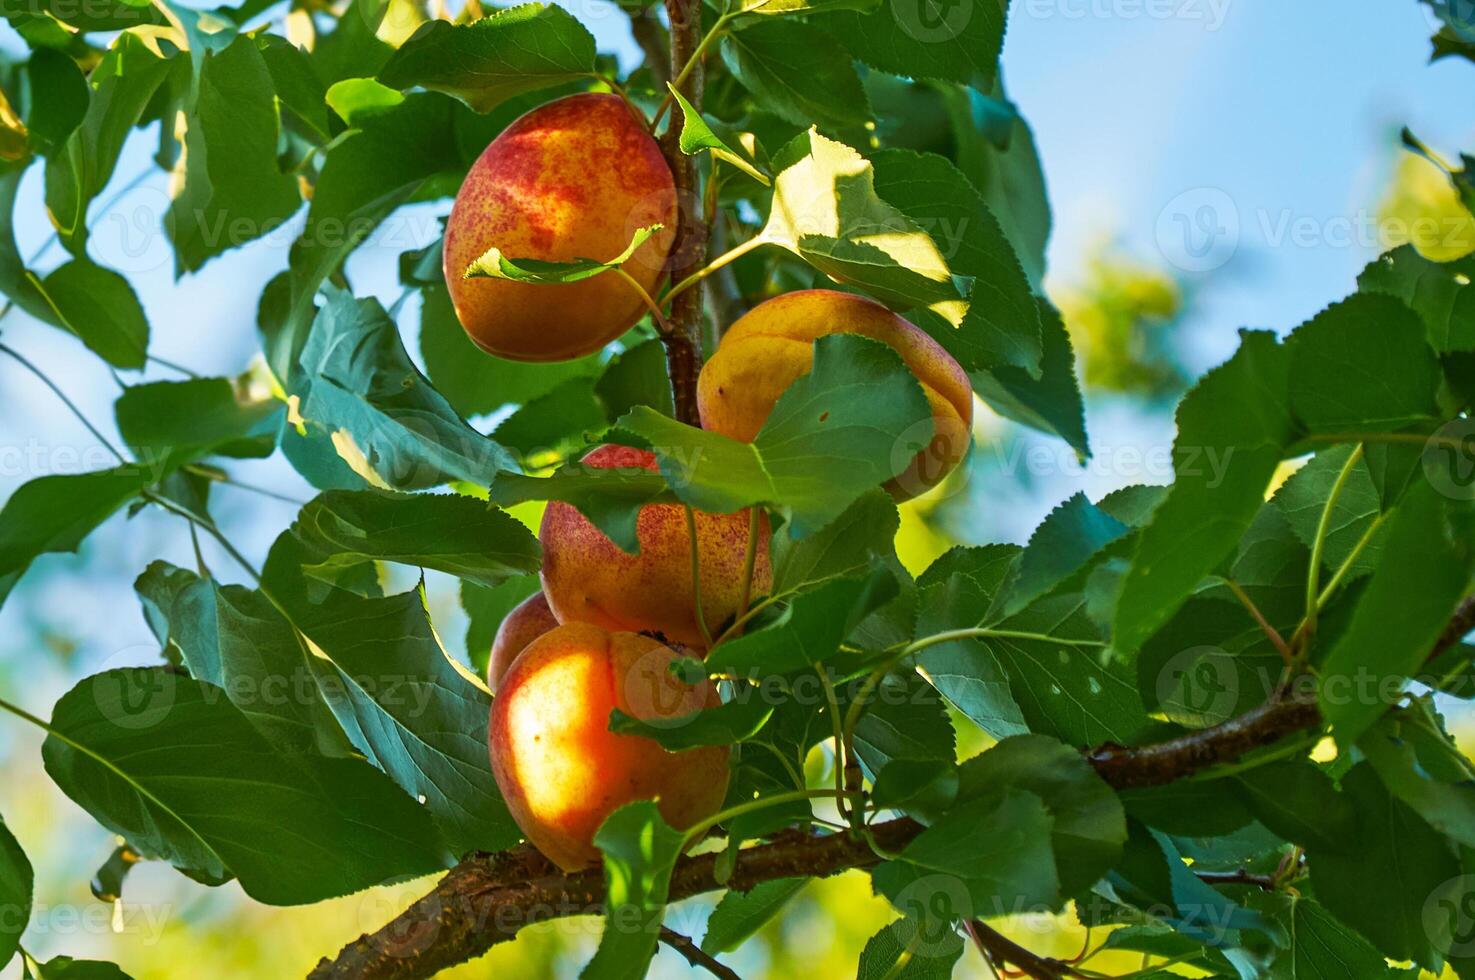 Ripe apricots on a tree among green leaves against a blue sky photo